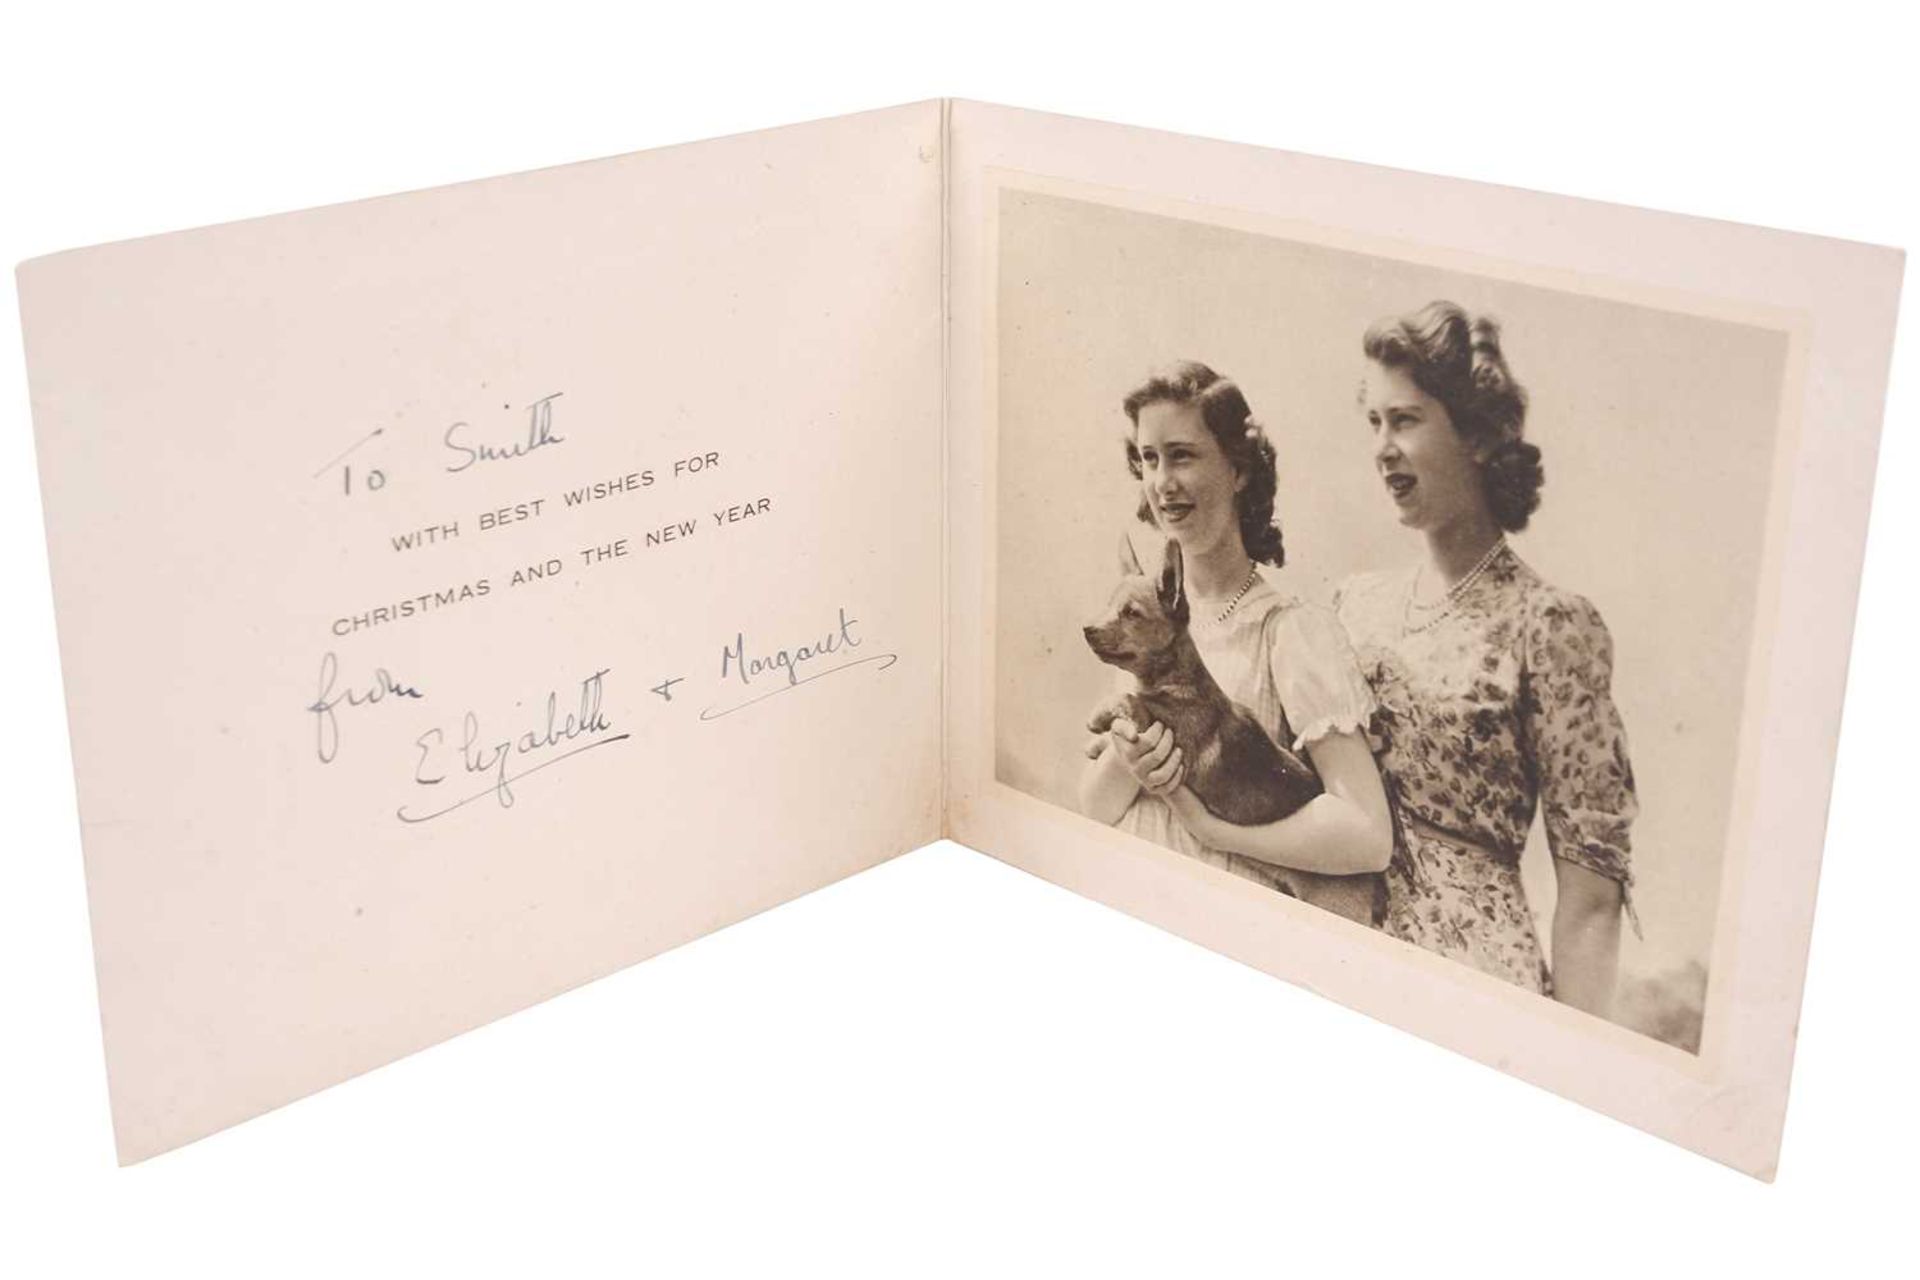 A rare 1940s Christmas card, sent and signed by Princess Elizabeth [later Queen Elizabeth II] and